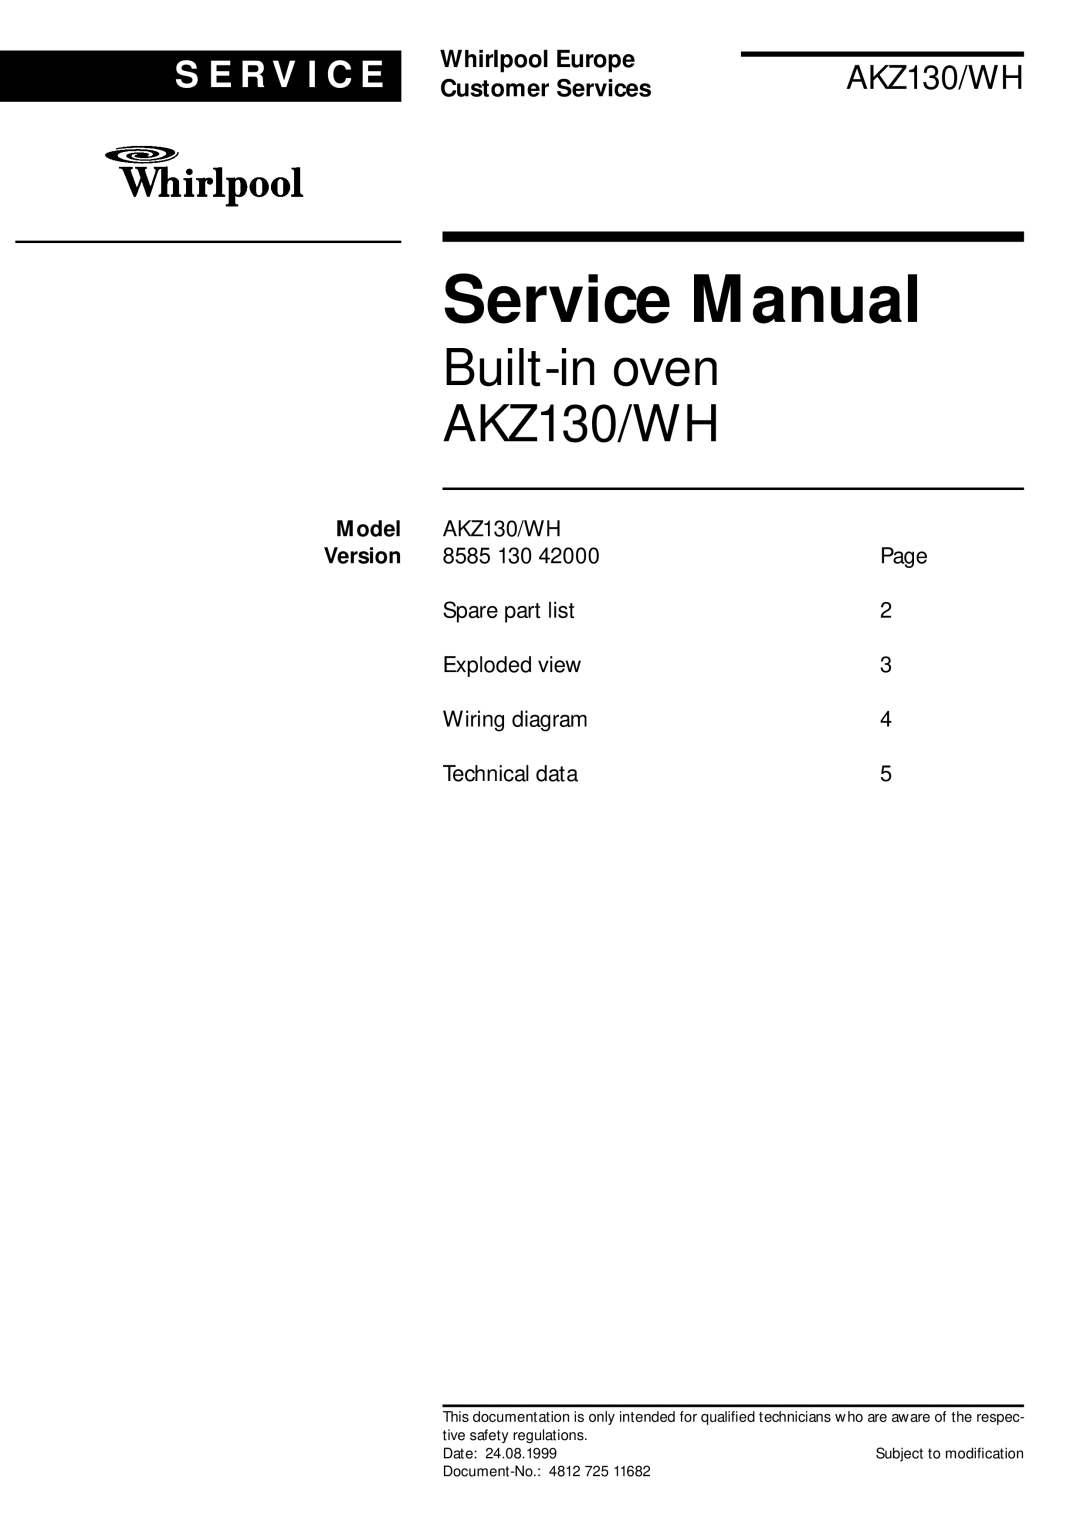 Whirlpool akz130 wh service manual Model, Built-inoven AKZ130/WH, S E R V I C E, Whirlpool Europe, Customer Services 